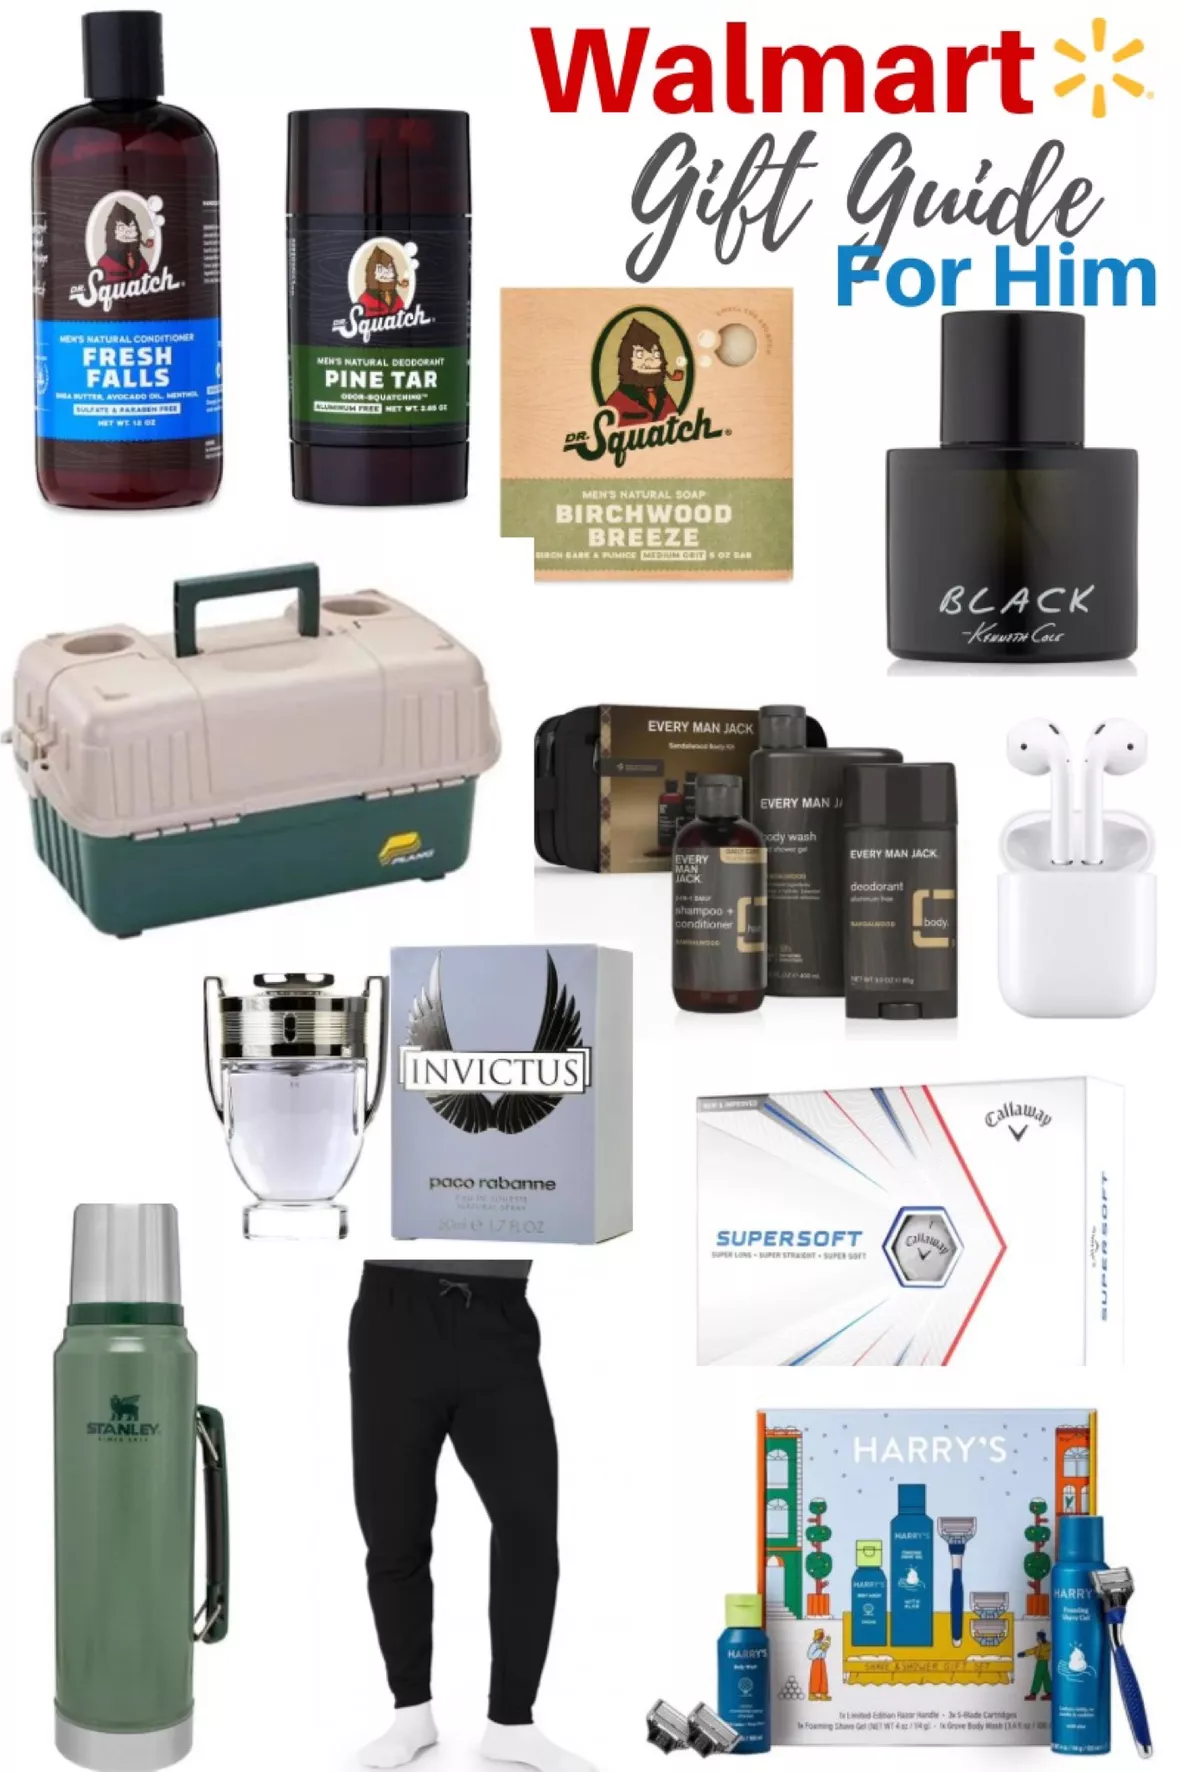 Dr. Squatch Gift Guide: Gift Ideas for Every Type of Man